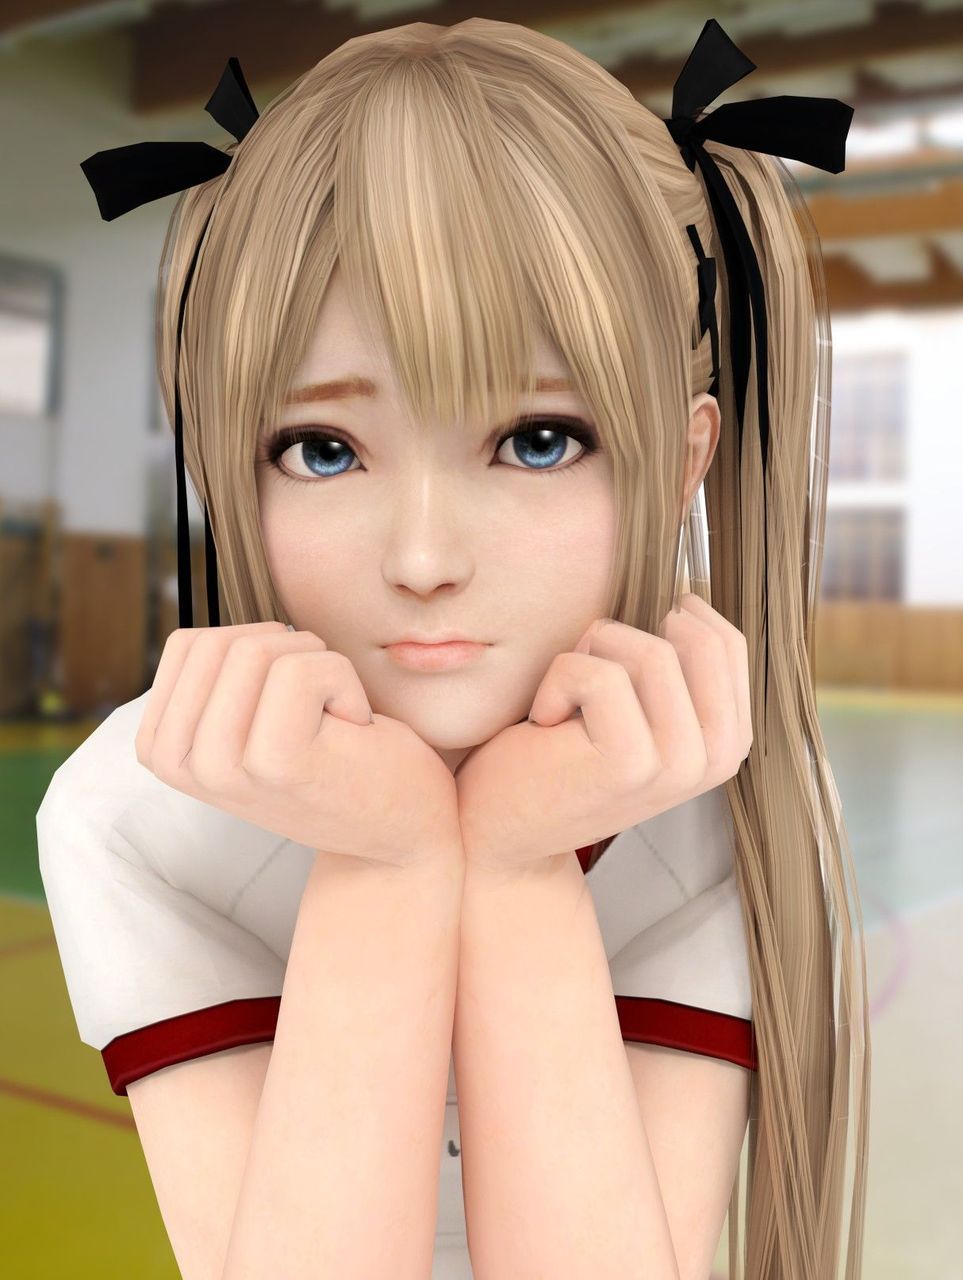 2D/3D images of girls relaxing [Dead or Alive] 1